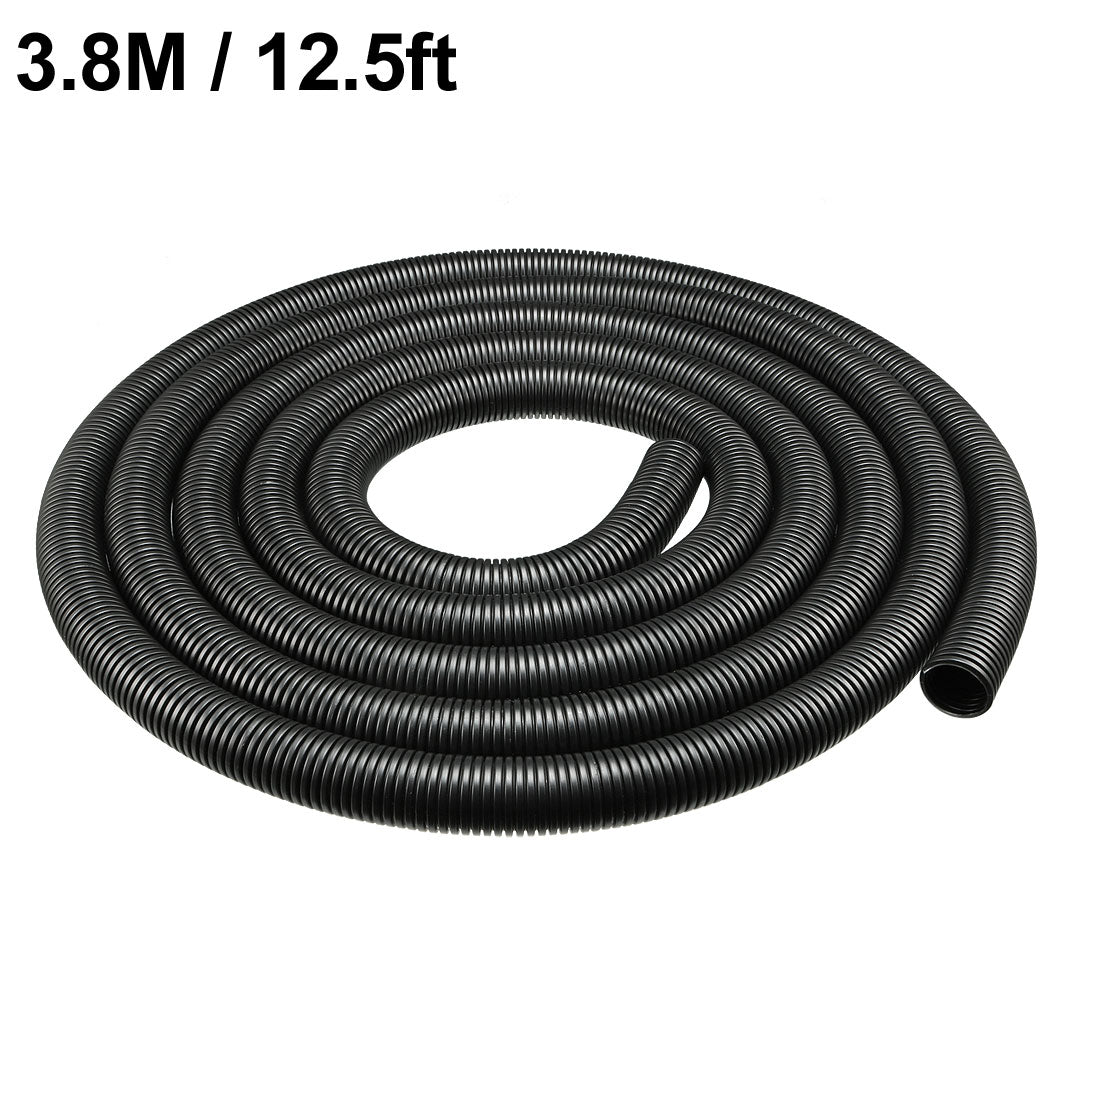 uxcell Uxcell 3.8 M 20 x 25 mm PP Flexible Corrugated Conduit Tube for Garden,Office Black